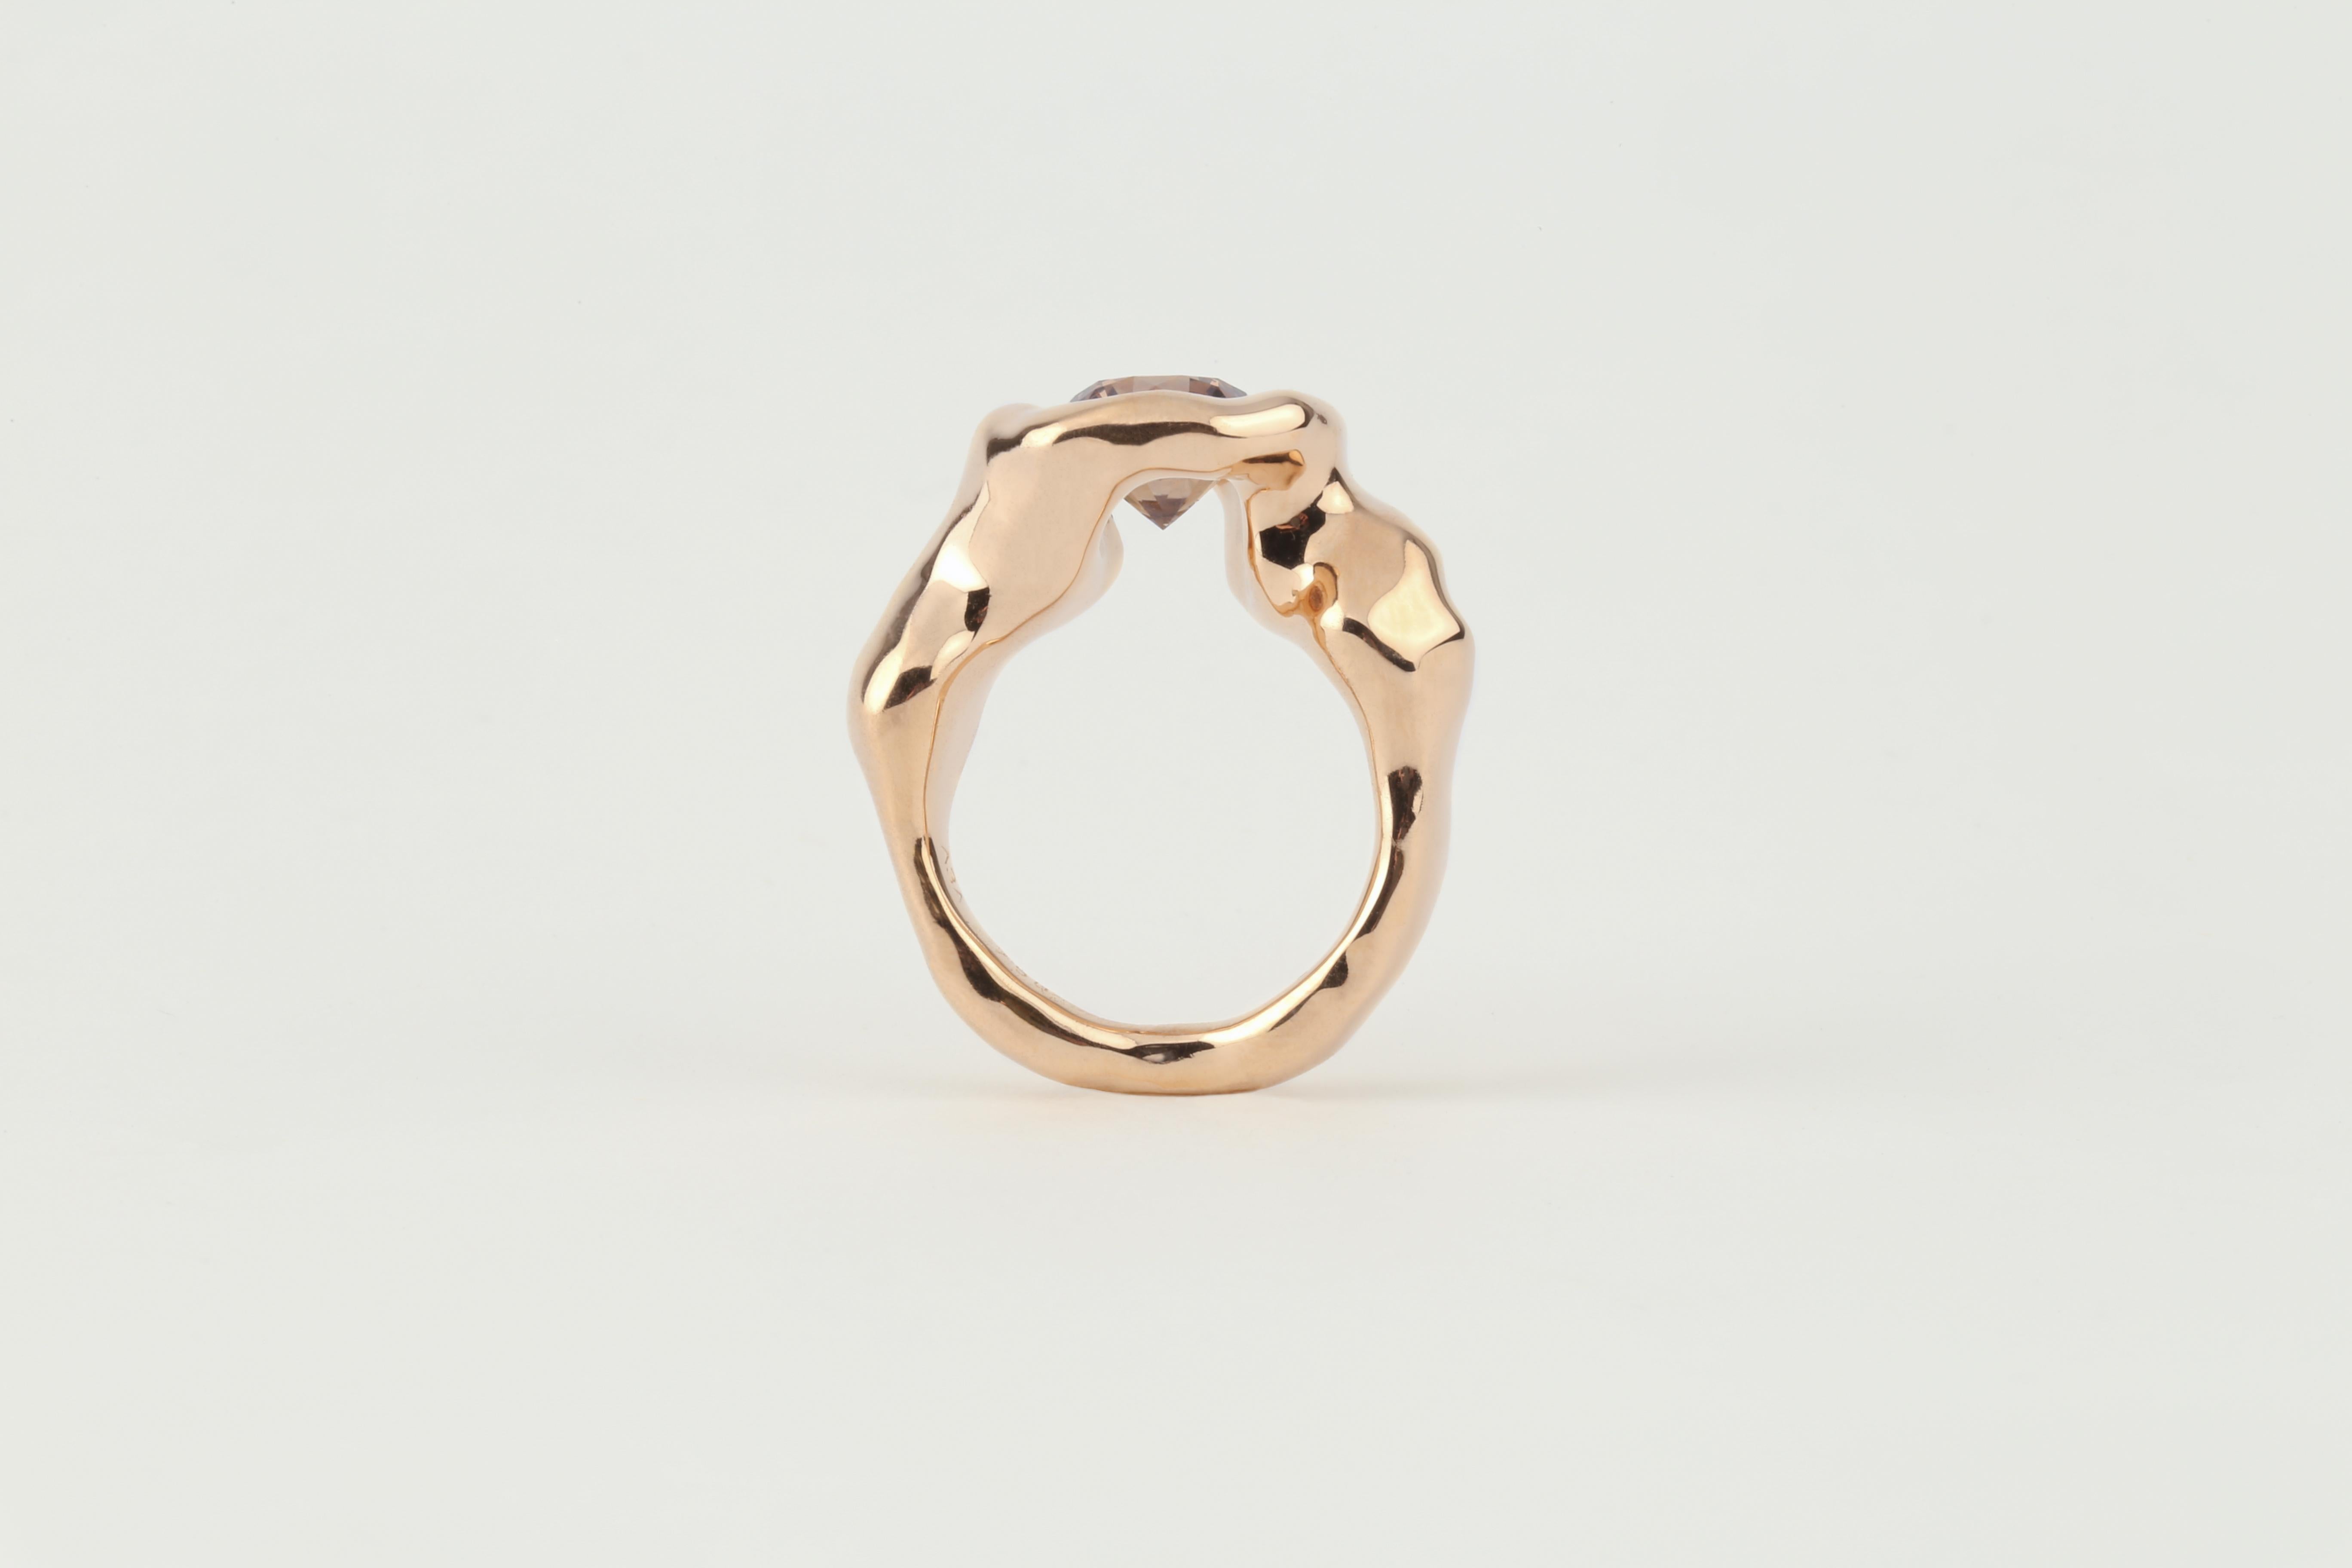 This ring is made of Rosegold (750/- or 18 karat) and has a melted structure. The 3 ct. big brown diamond matches the colour of the gold perfectly. The forms details allow to see the lower part of the diamond, so you can discover the ring like a